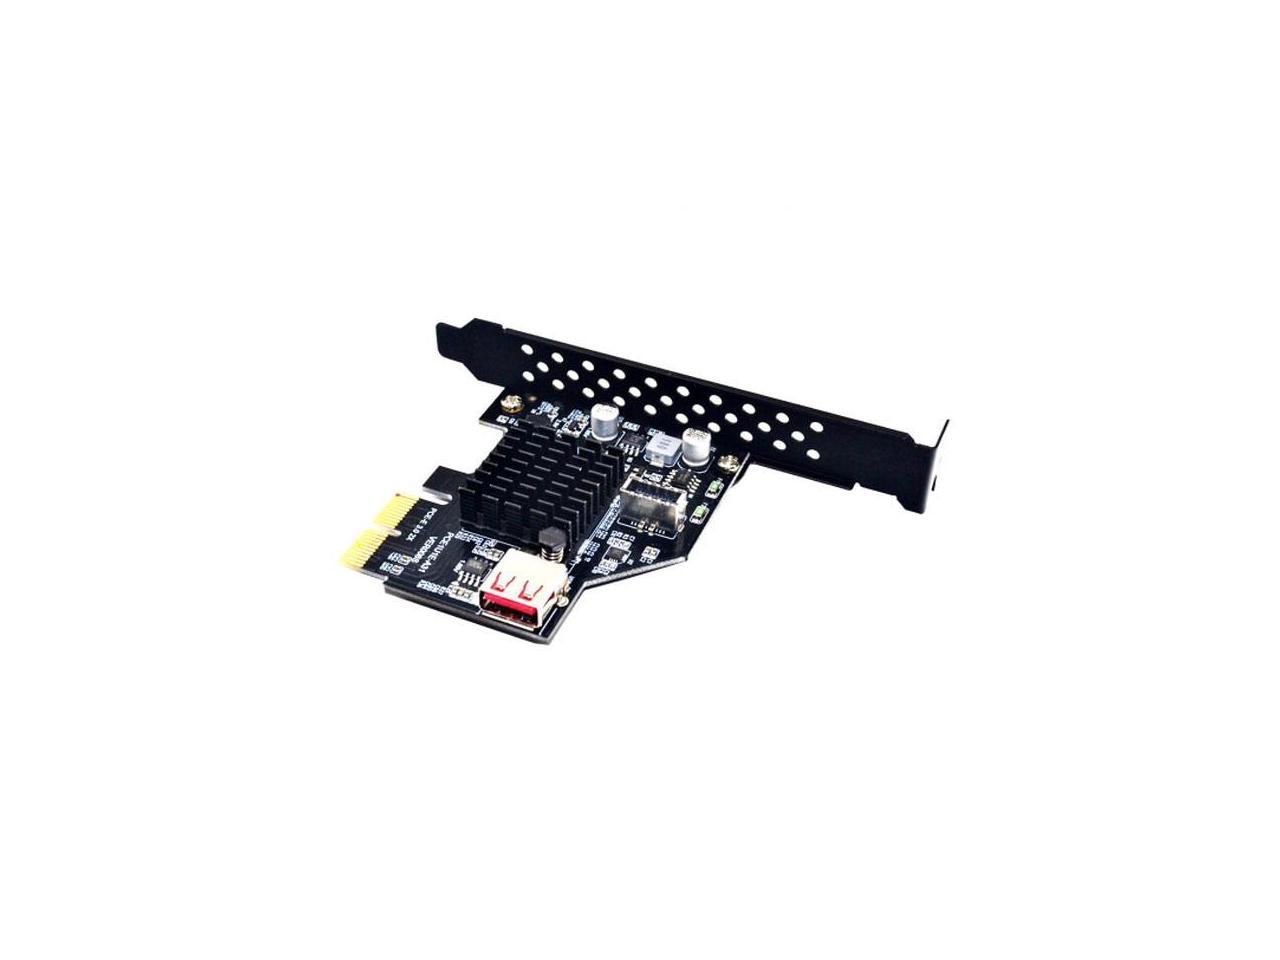 Cablecc USB 3.1 Front Panel Socket & USB 2.0 to PCI-E Express Card Adapter for Motherboard 